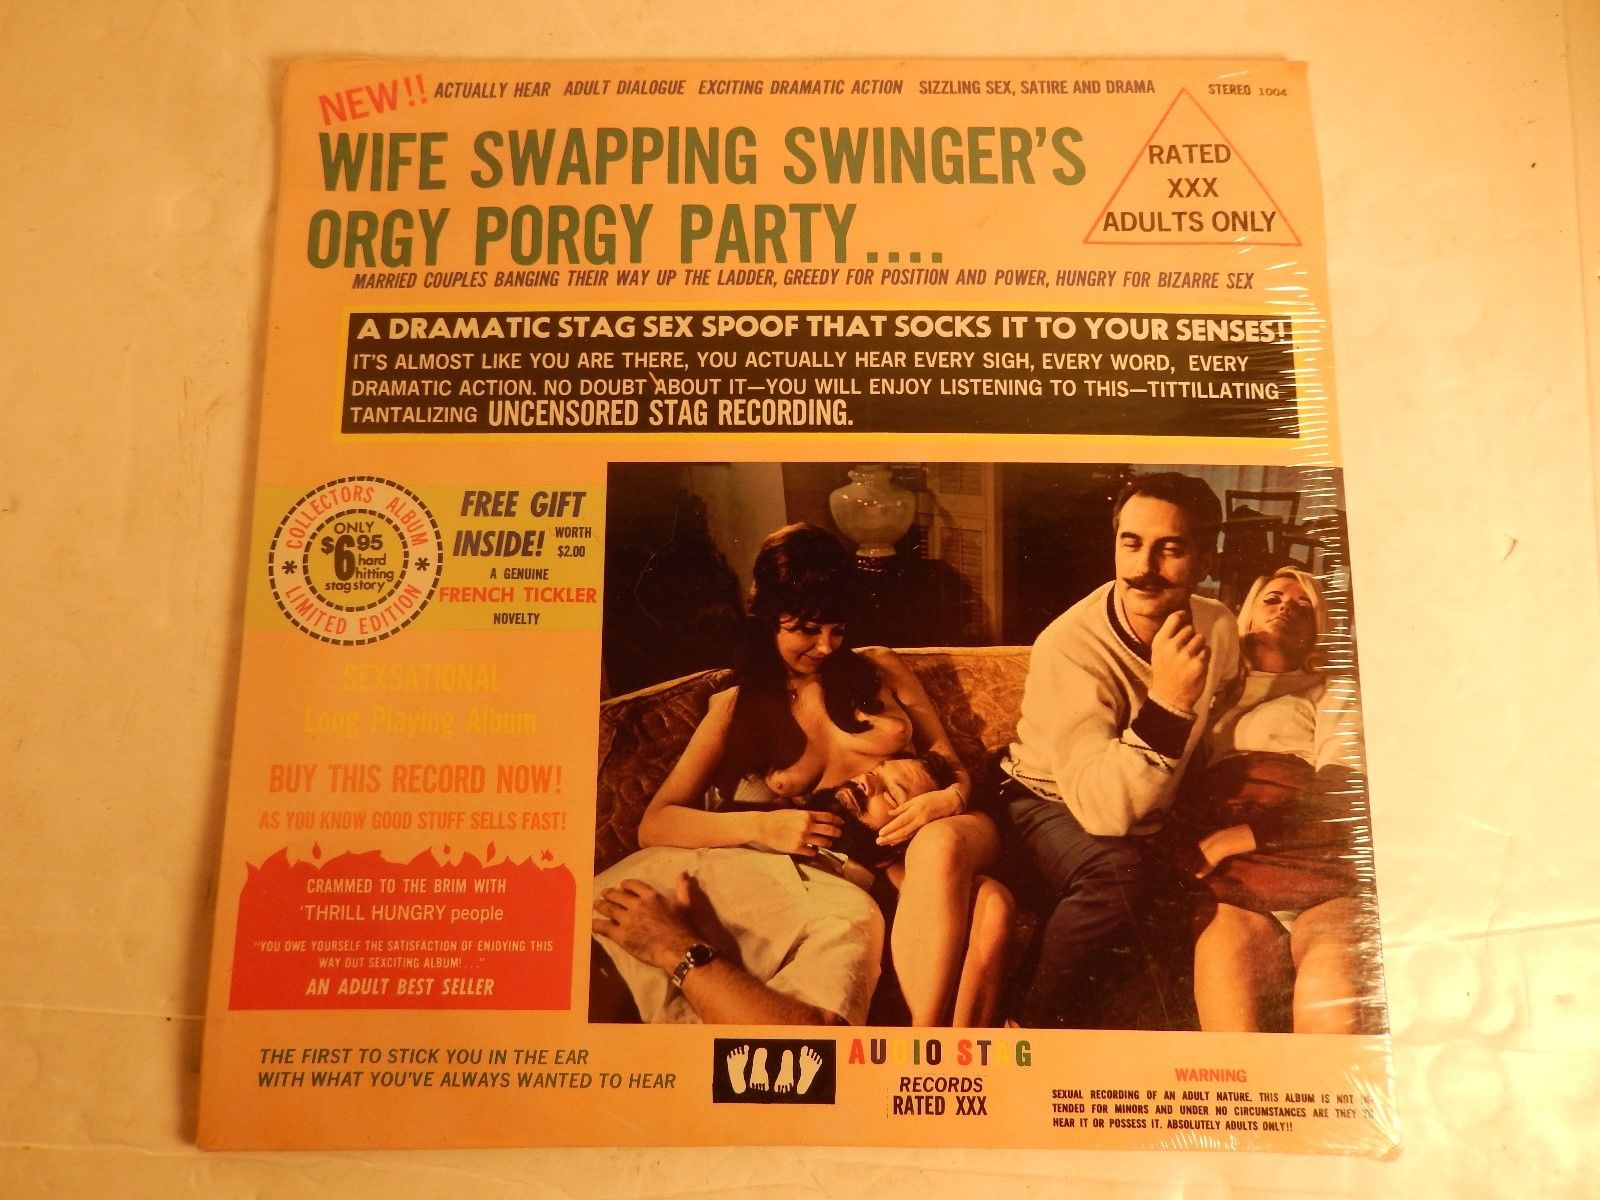 popsike - Vintage Sealed LP Audio Stag Records Adult XXX Wife Swapping Swingers Orgy Porgy